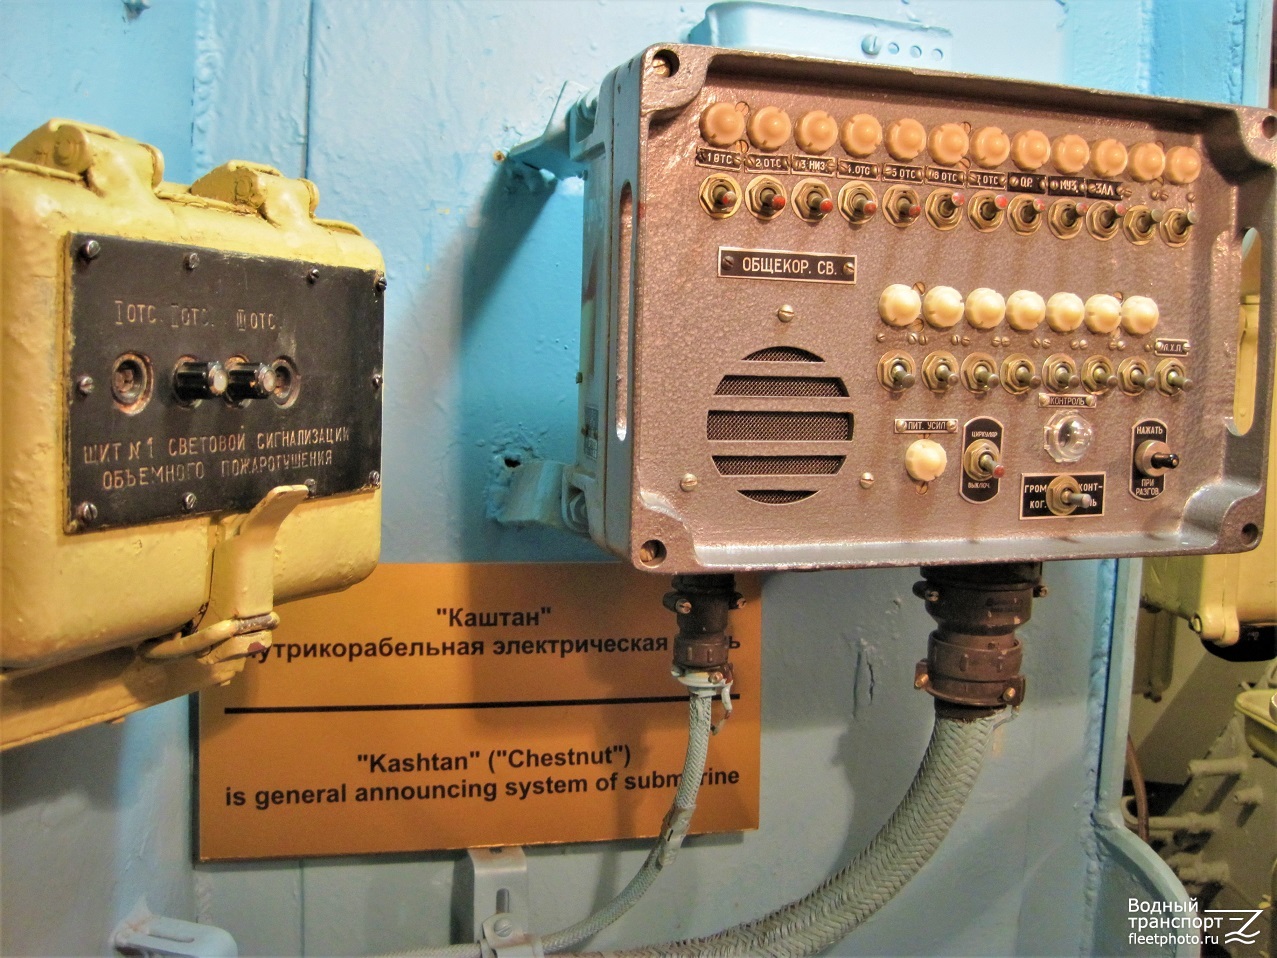 Б-440. Internal compartments